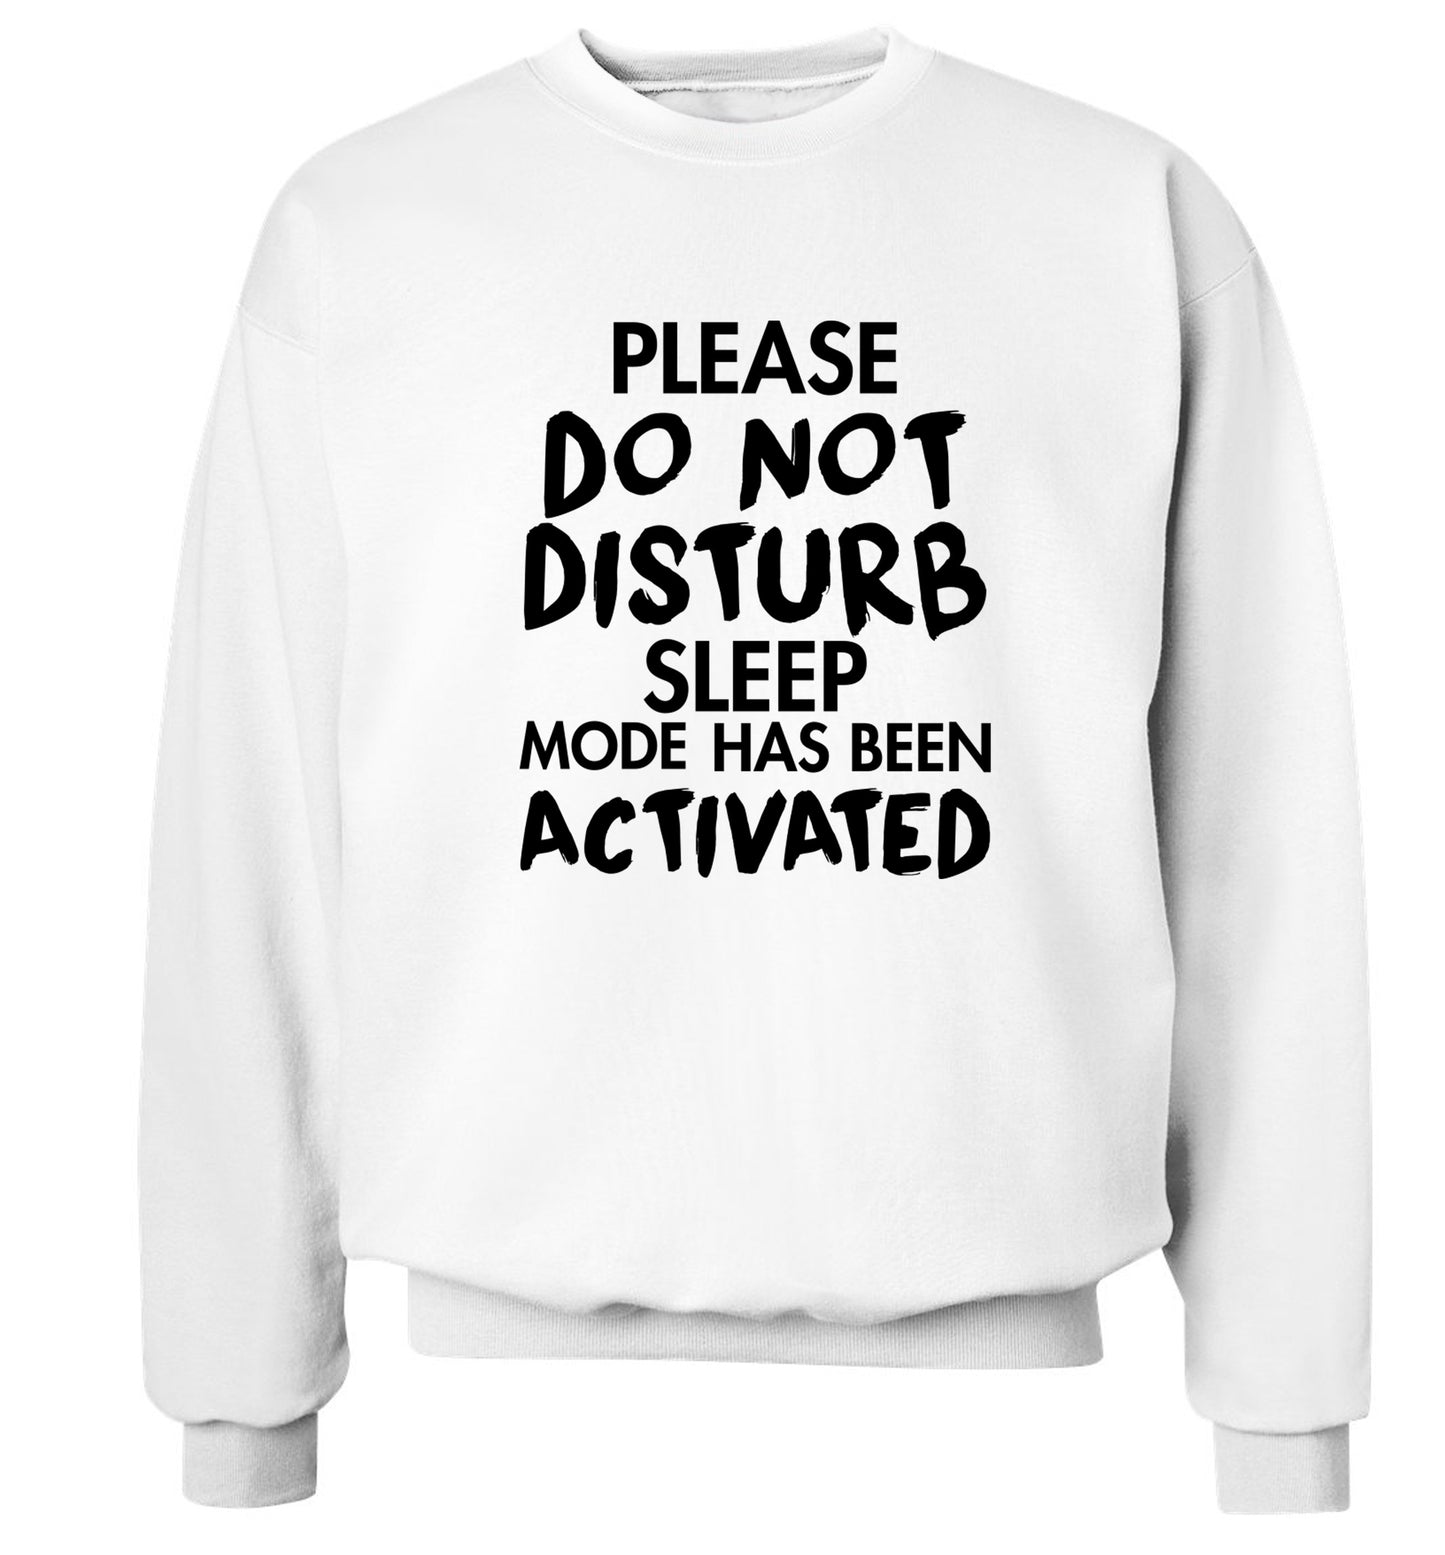 Please do not disturb sleeping mode has been activated Adult's unisex white Sweater 2XL